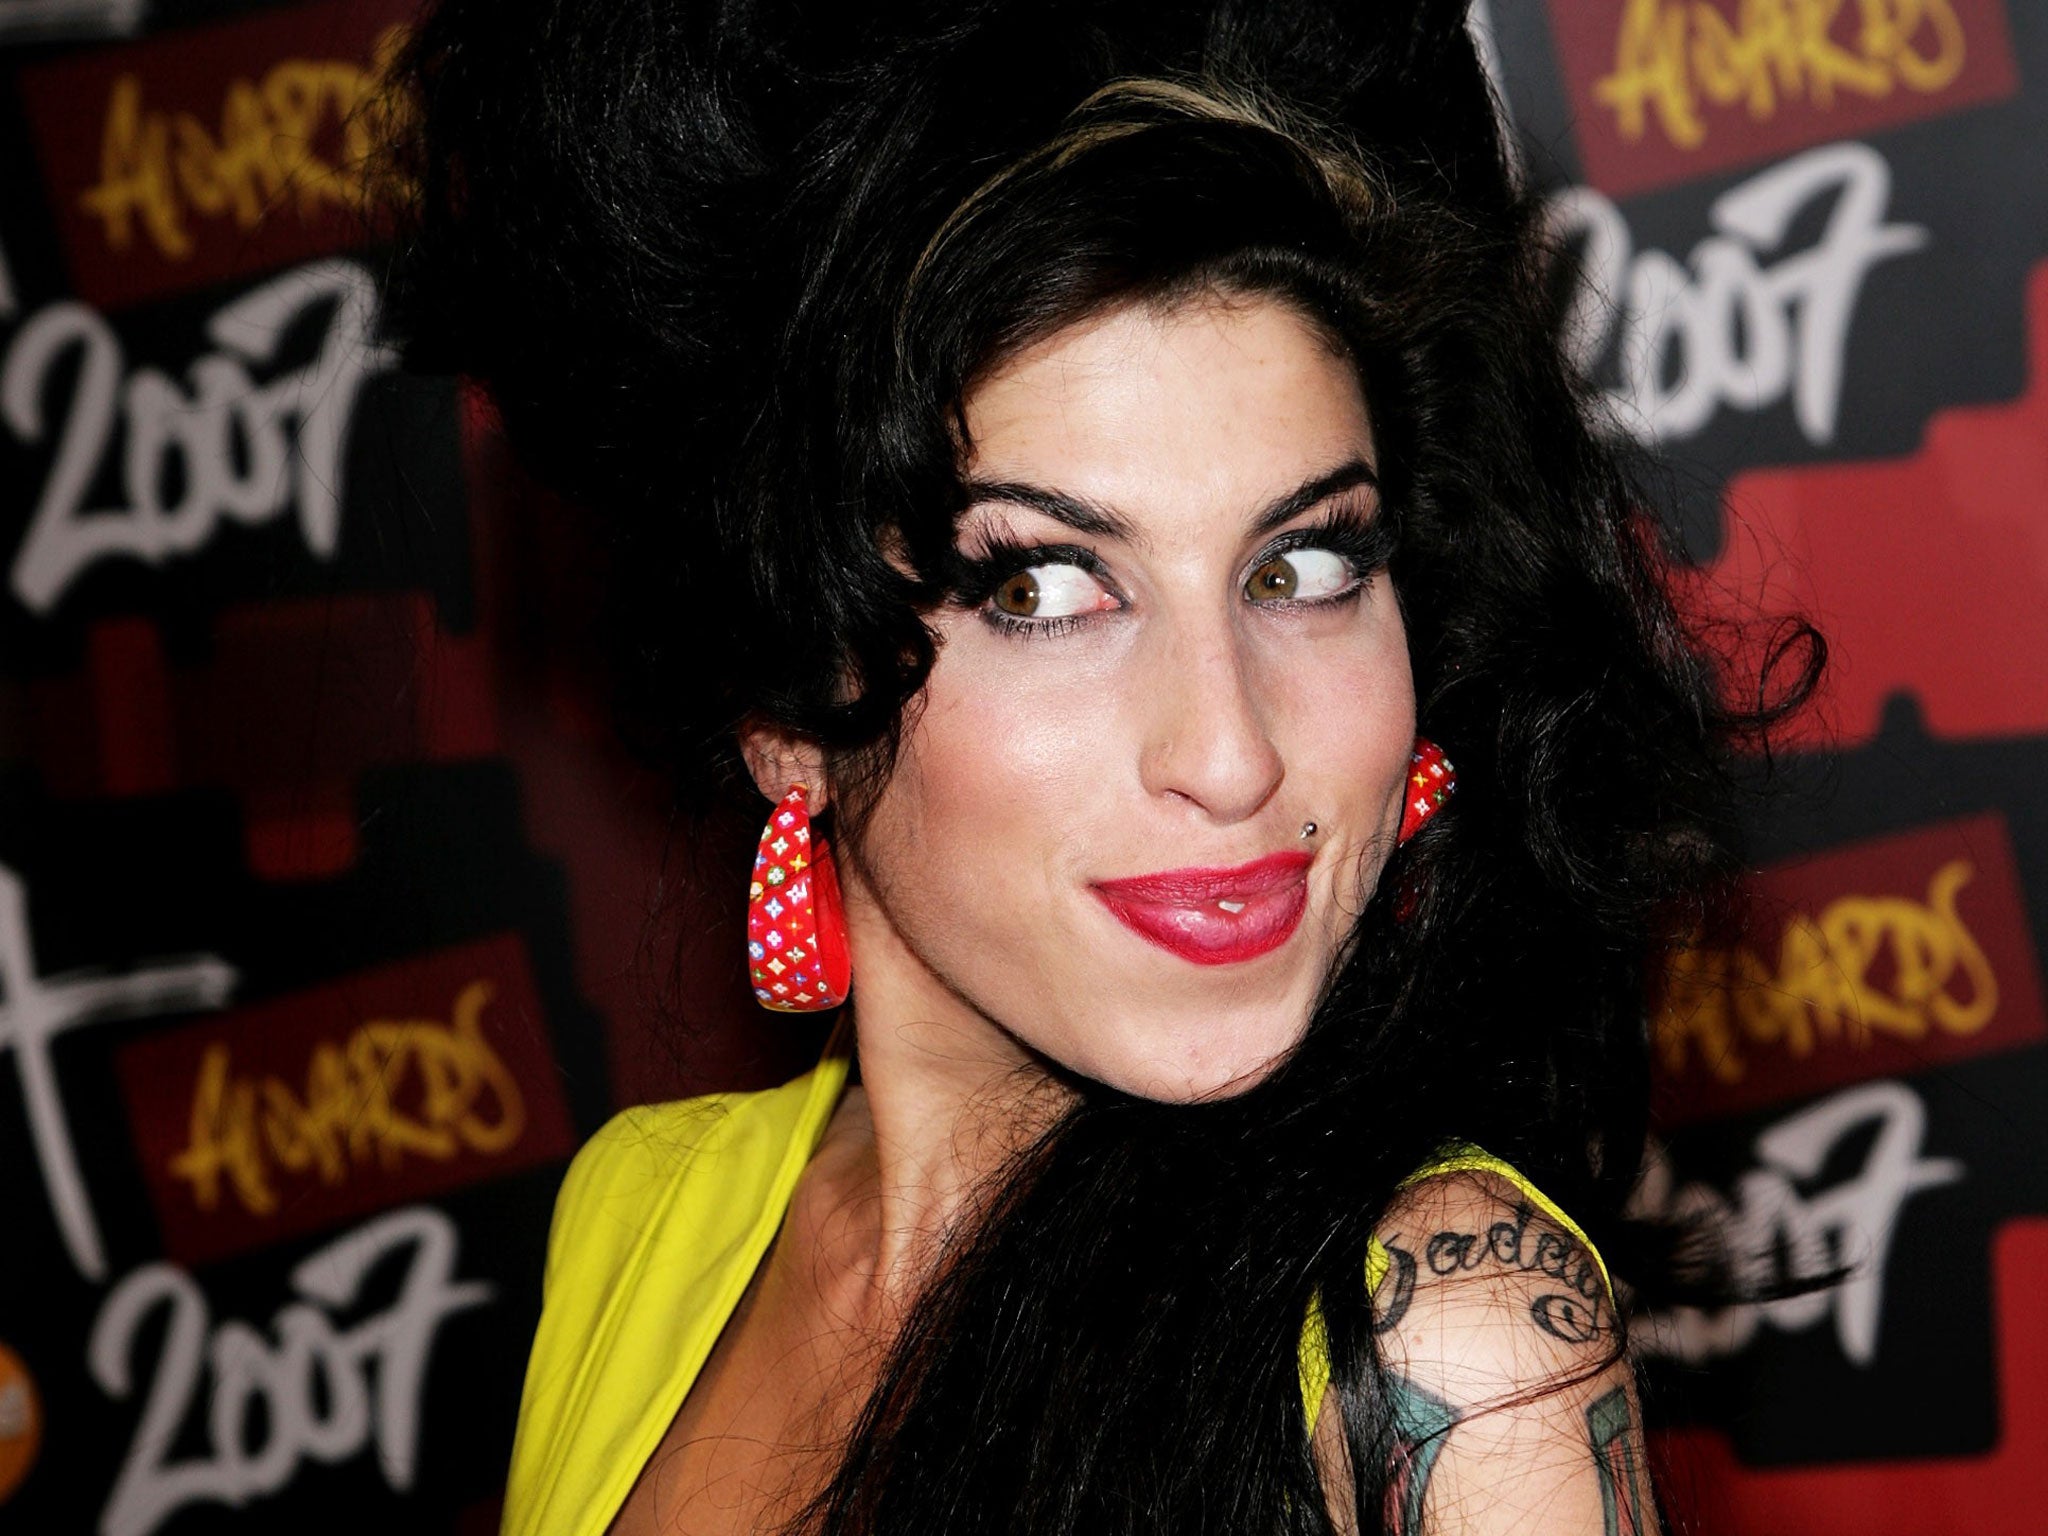 Walk on by: Amy Winehouse could be on the Camden walk of fame